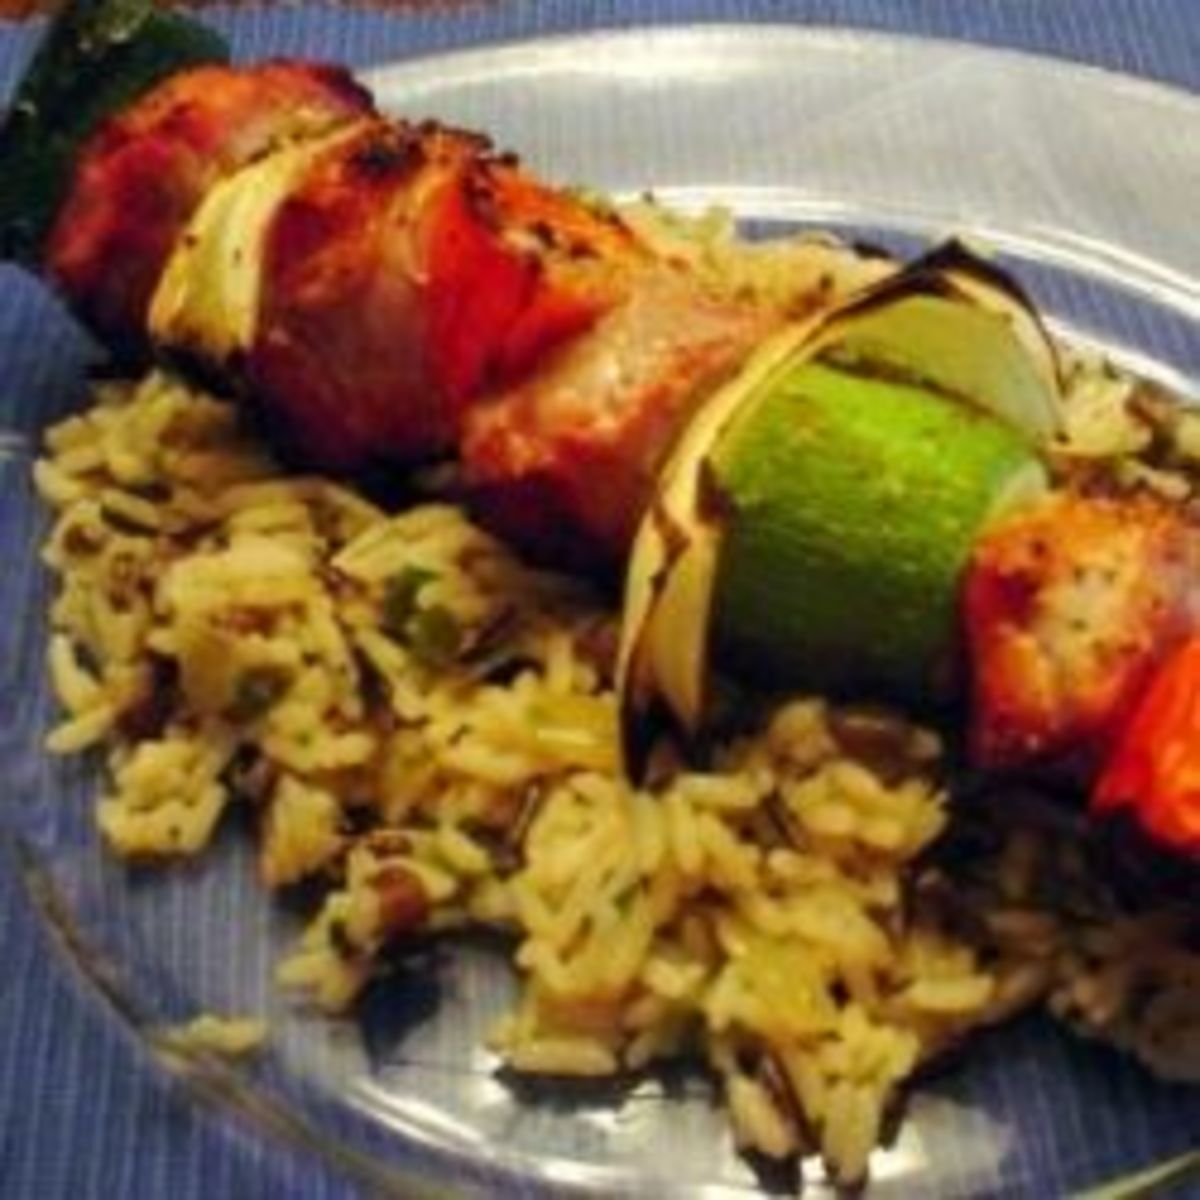 Try serving shish kabobs on rice pilaf.